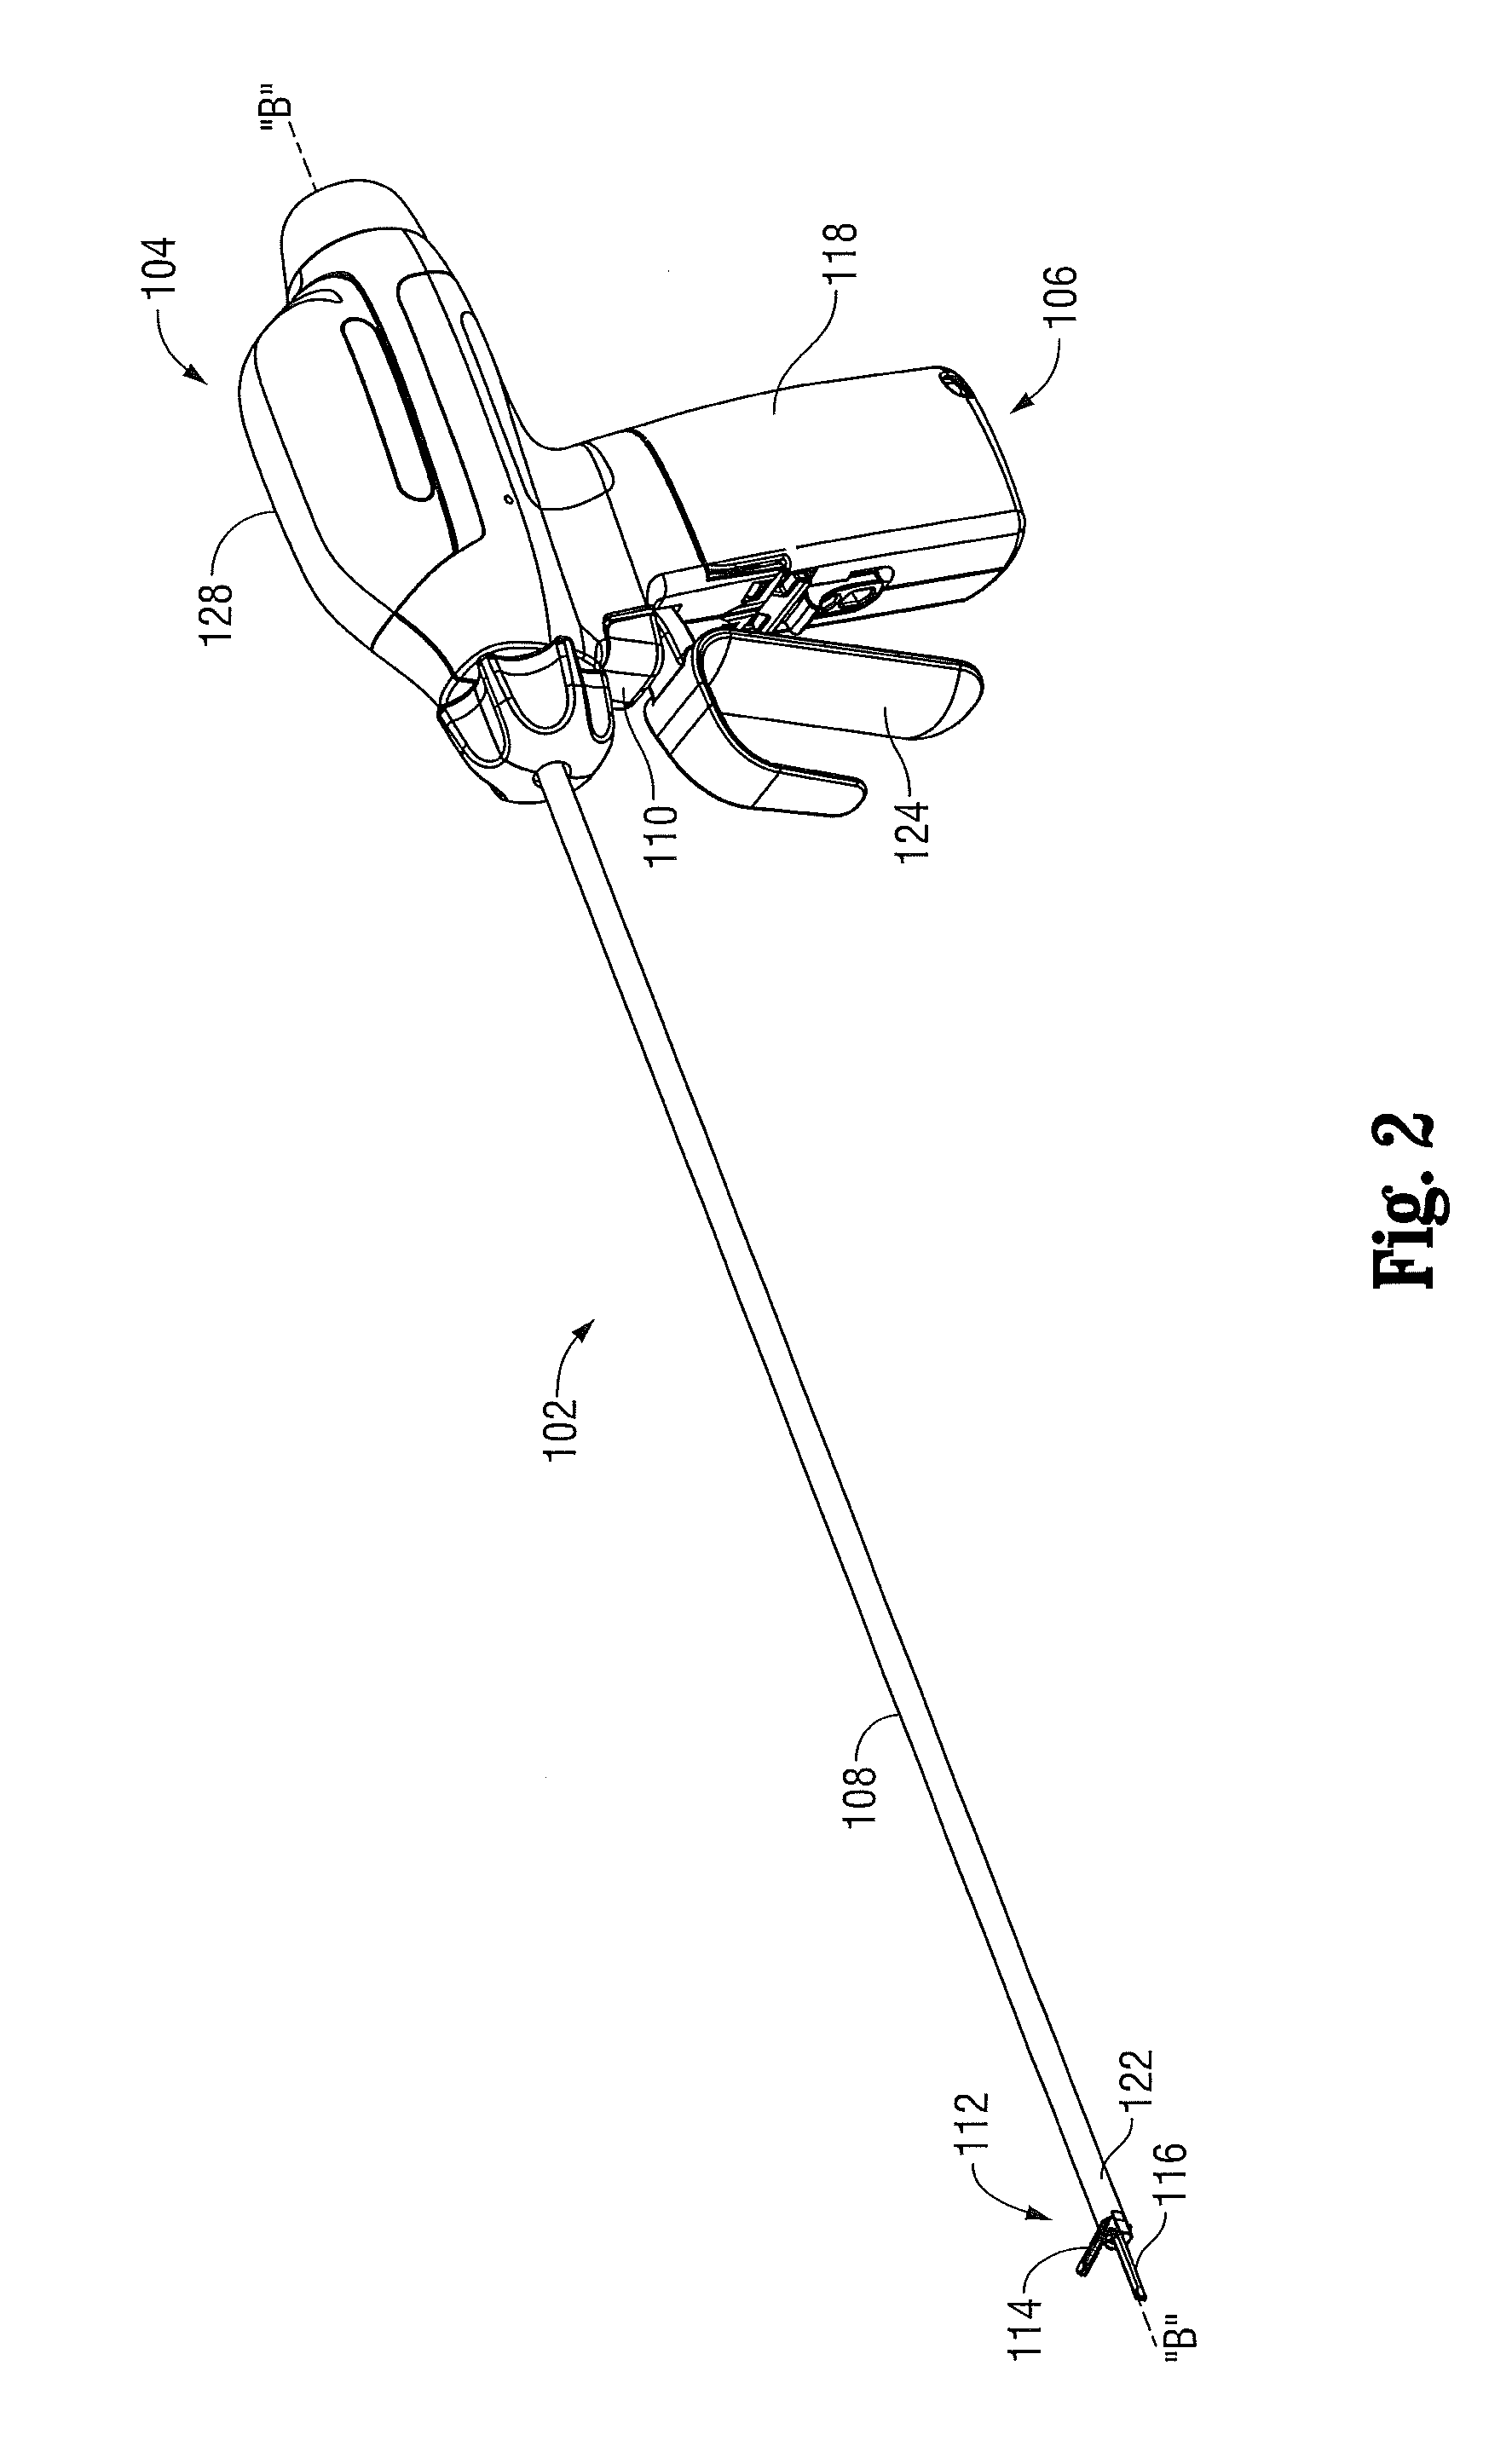 Devices, systems, and methods for battery cell fault detection